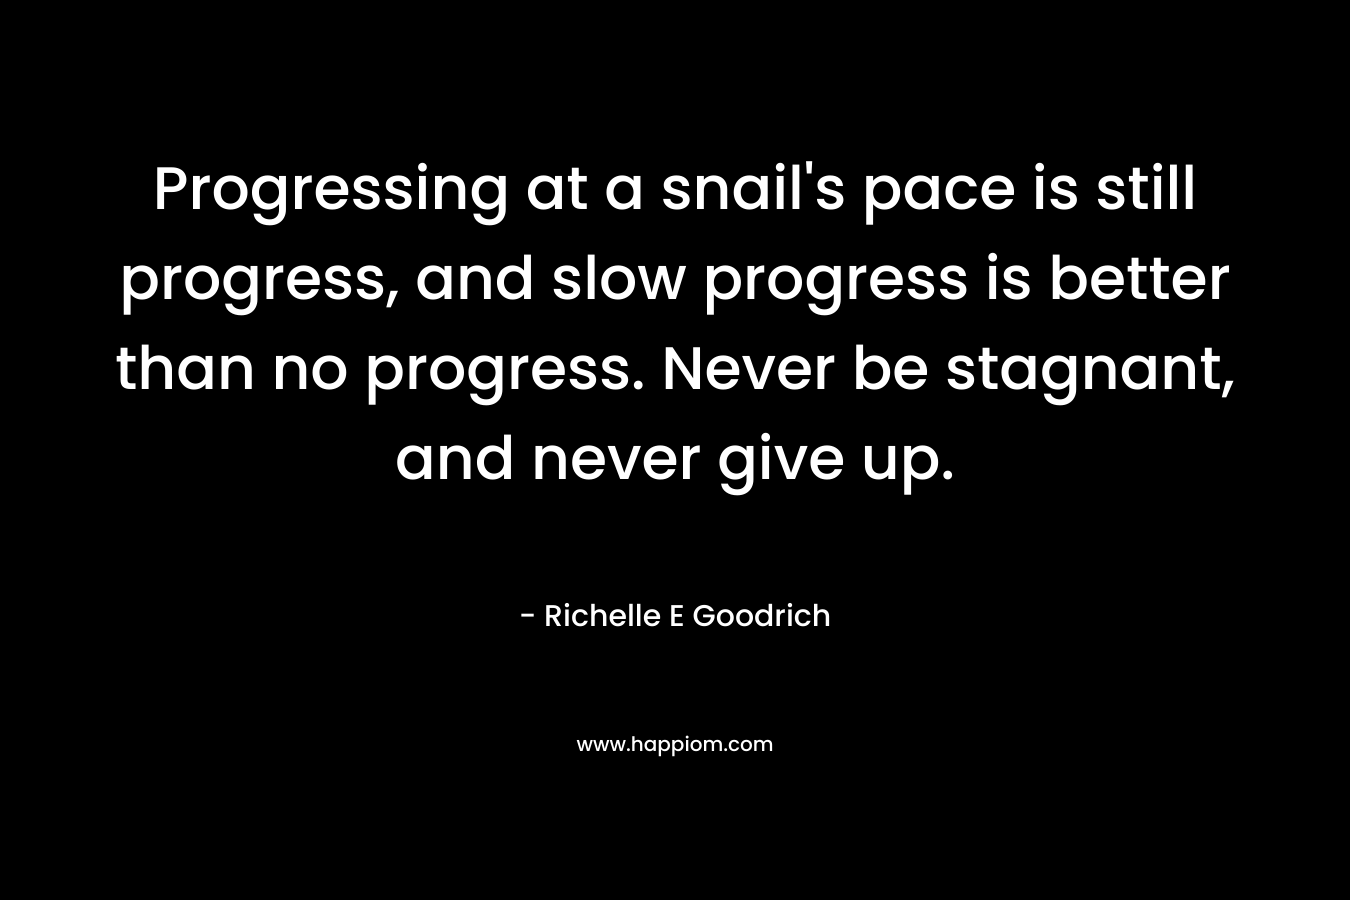 Progressing at a snail’s pace is still progress, and slow progress is better than no progress. Never be stagnant, and never give up. – Richelle E Goodrich